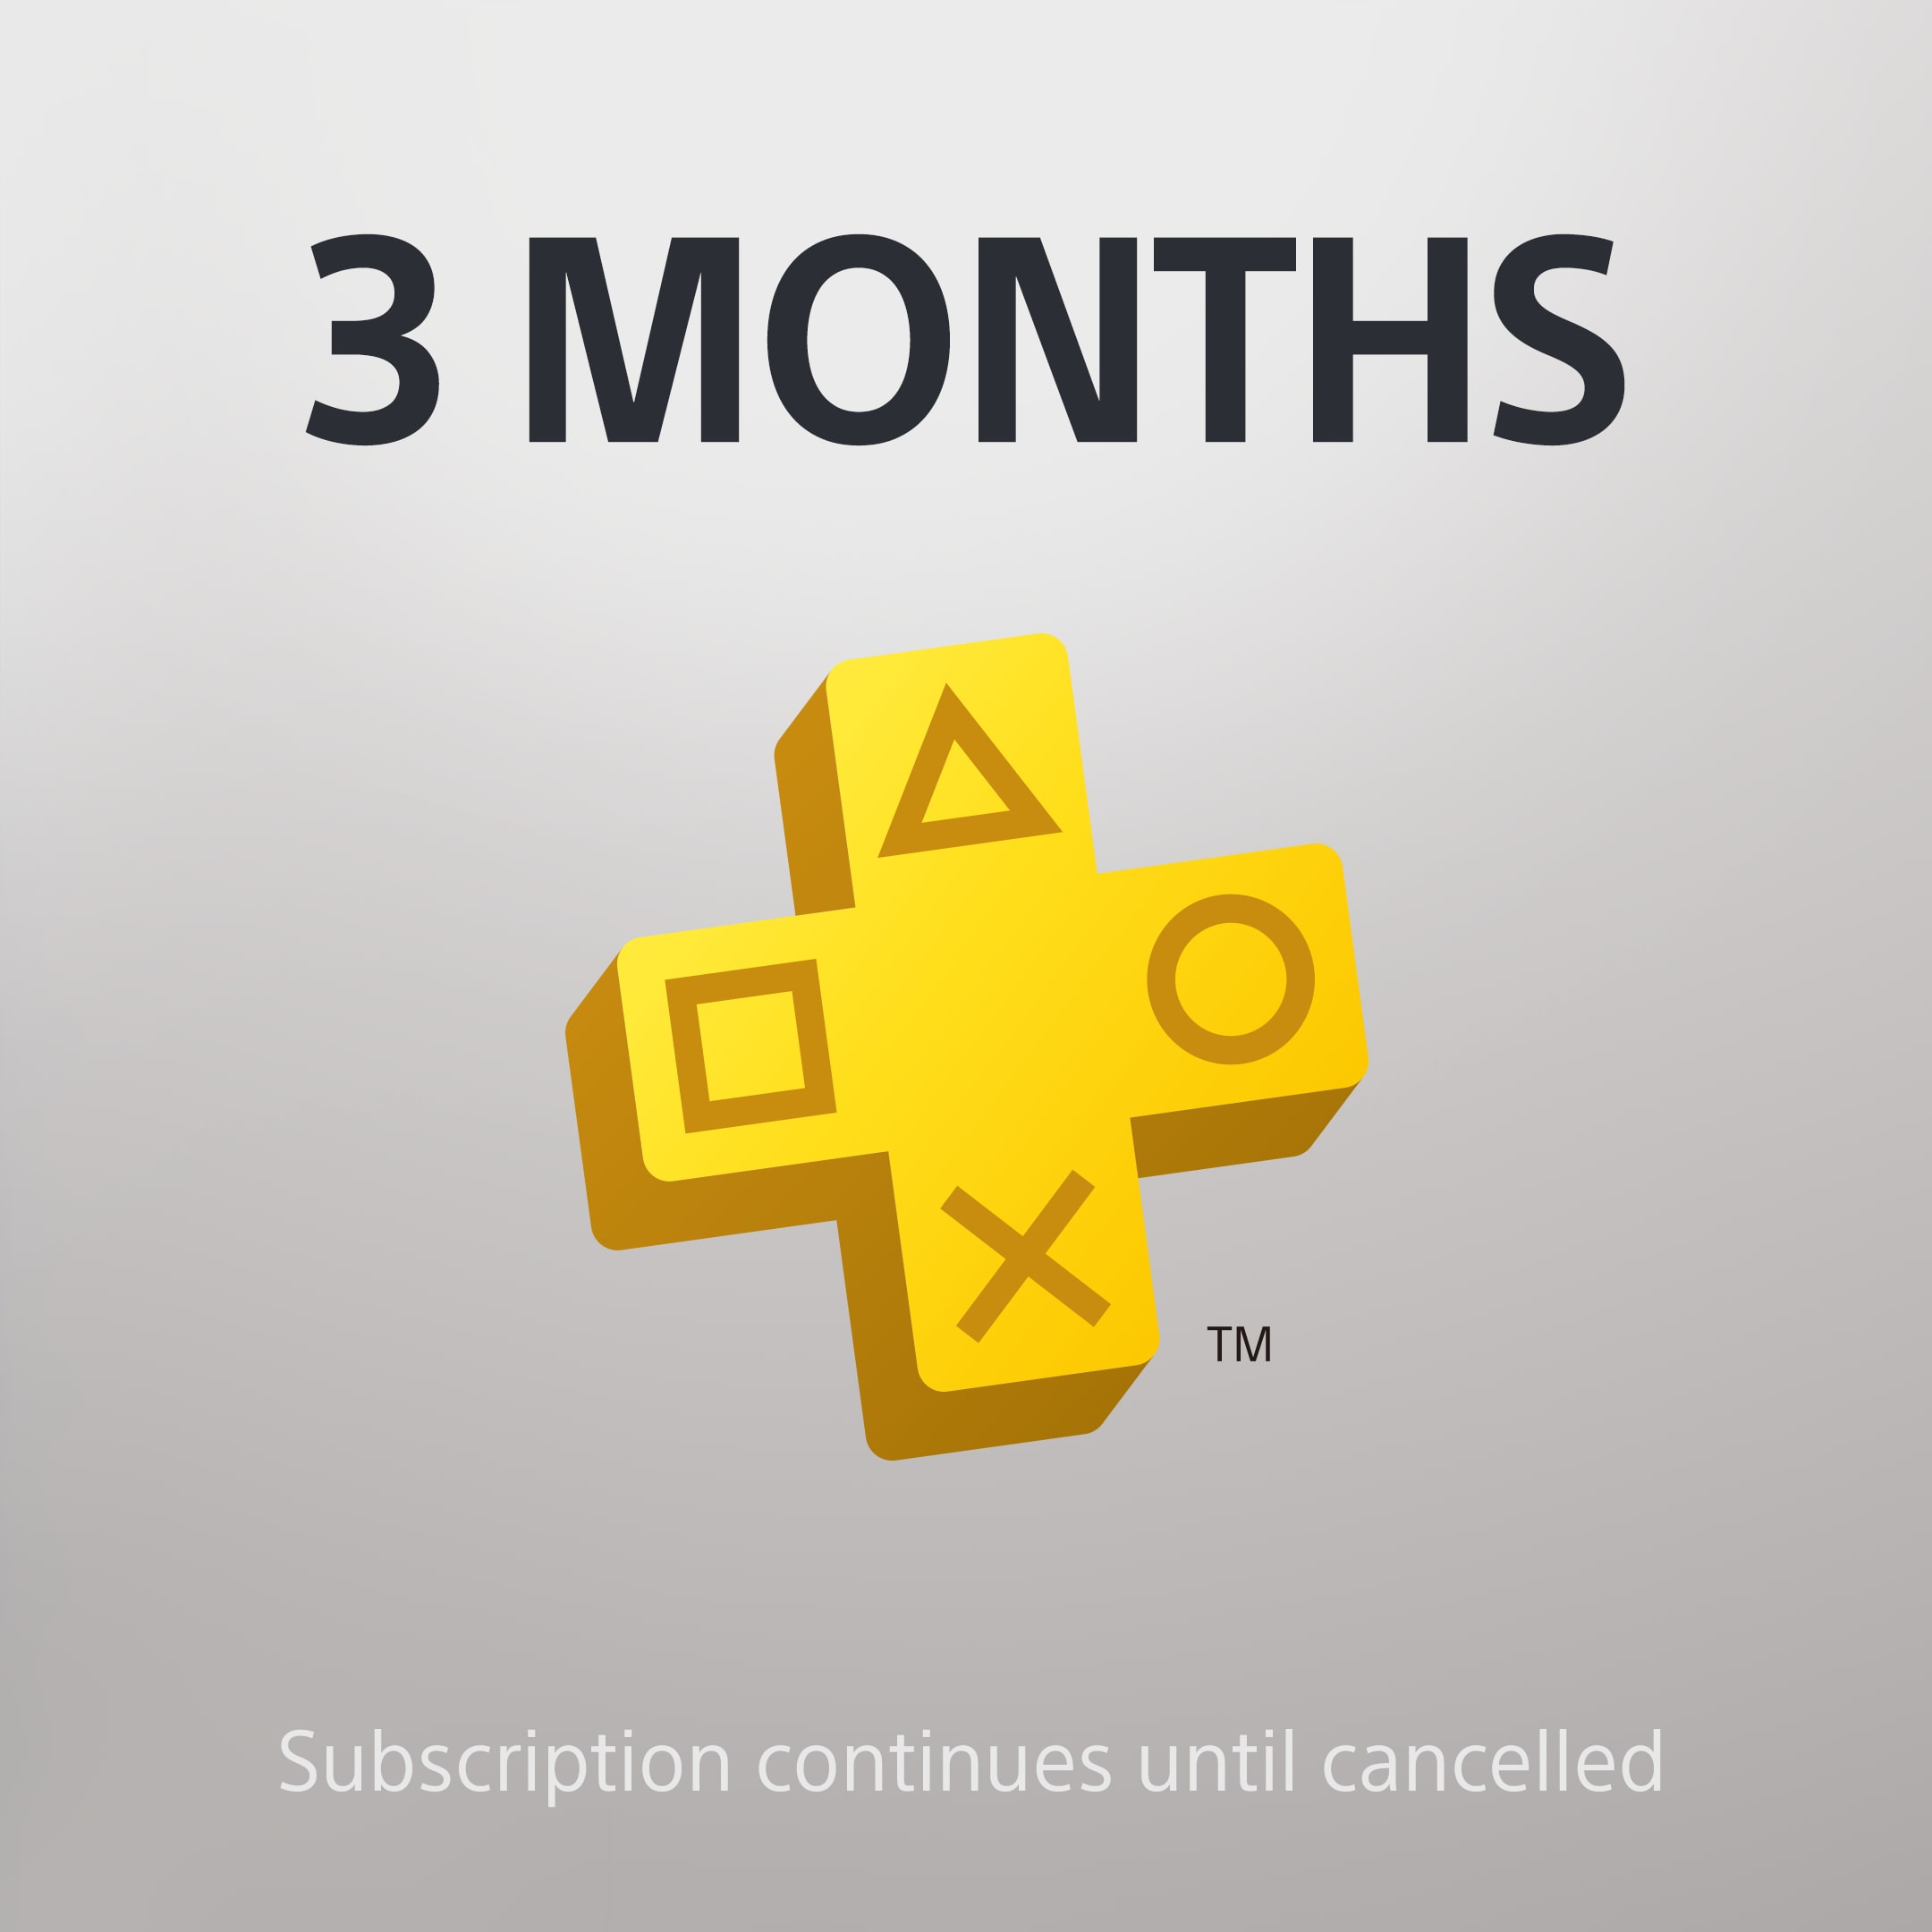 playstation network 3 month card